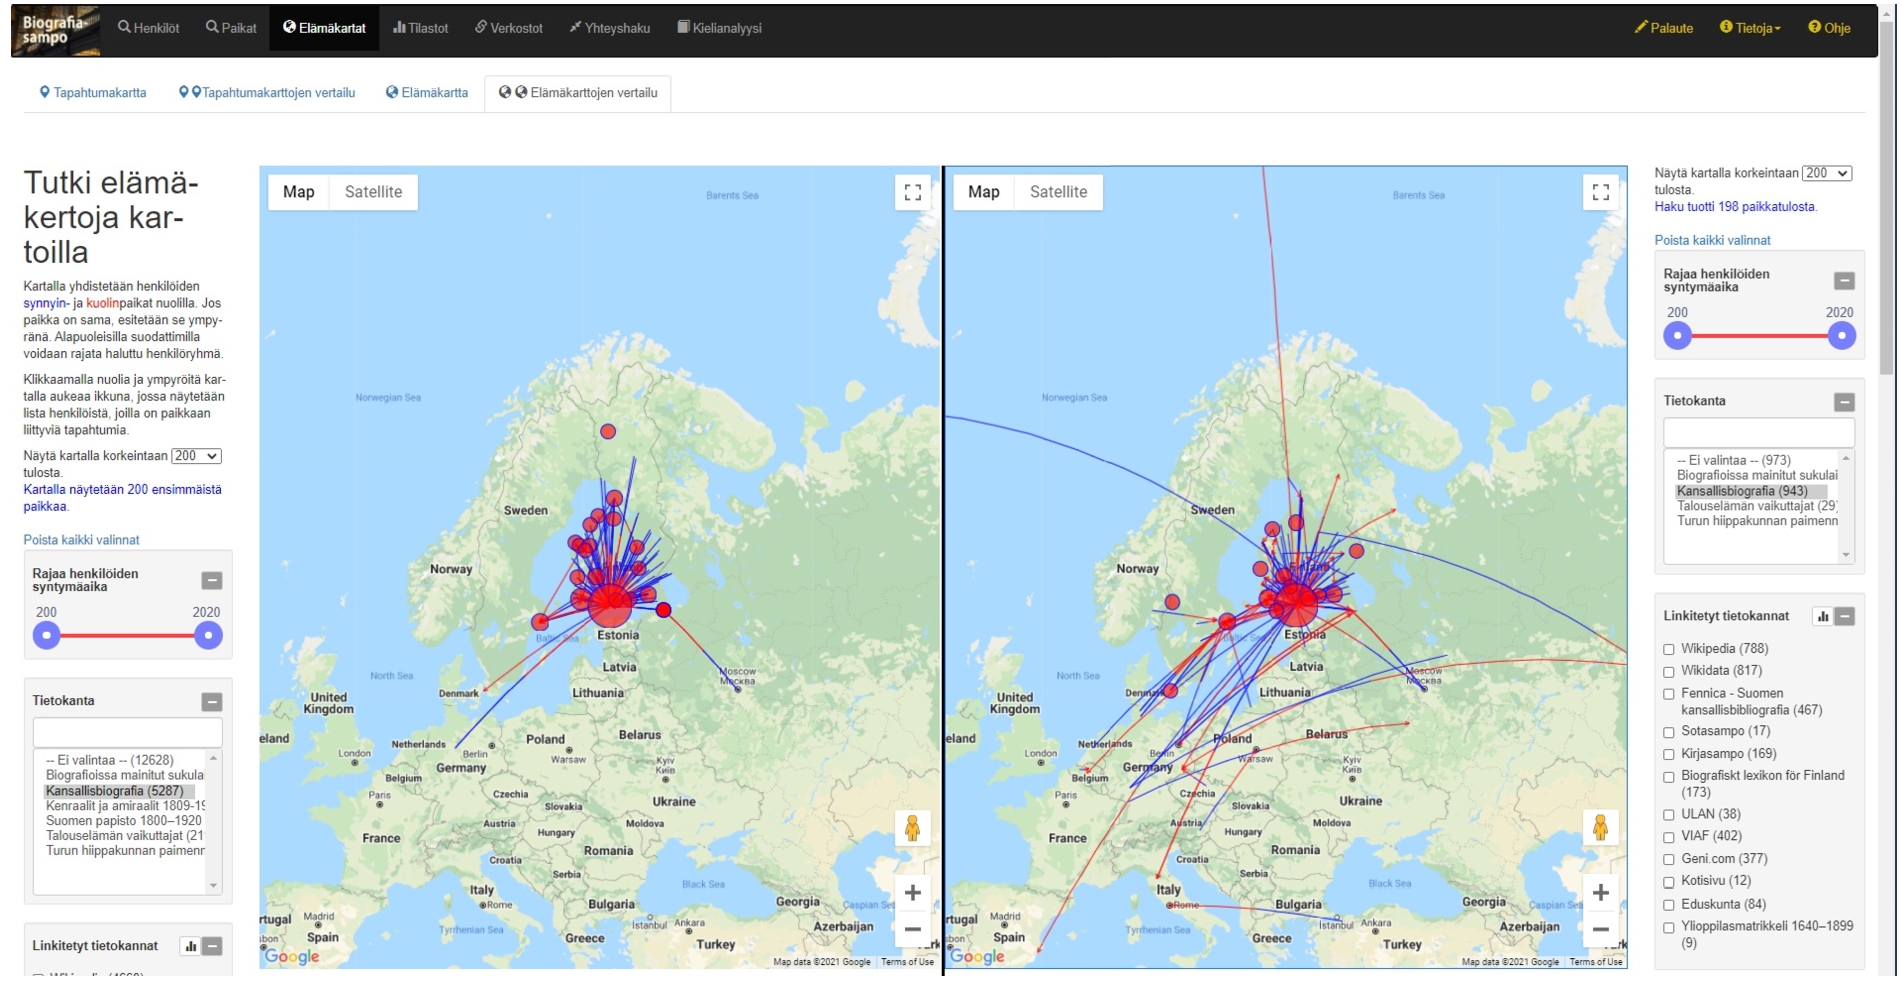 Comparing life maps of male (left) and female (right) biographees in the NBF in the BiographySampo portal.